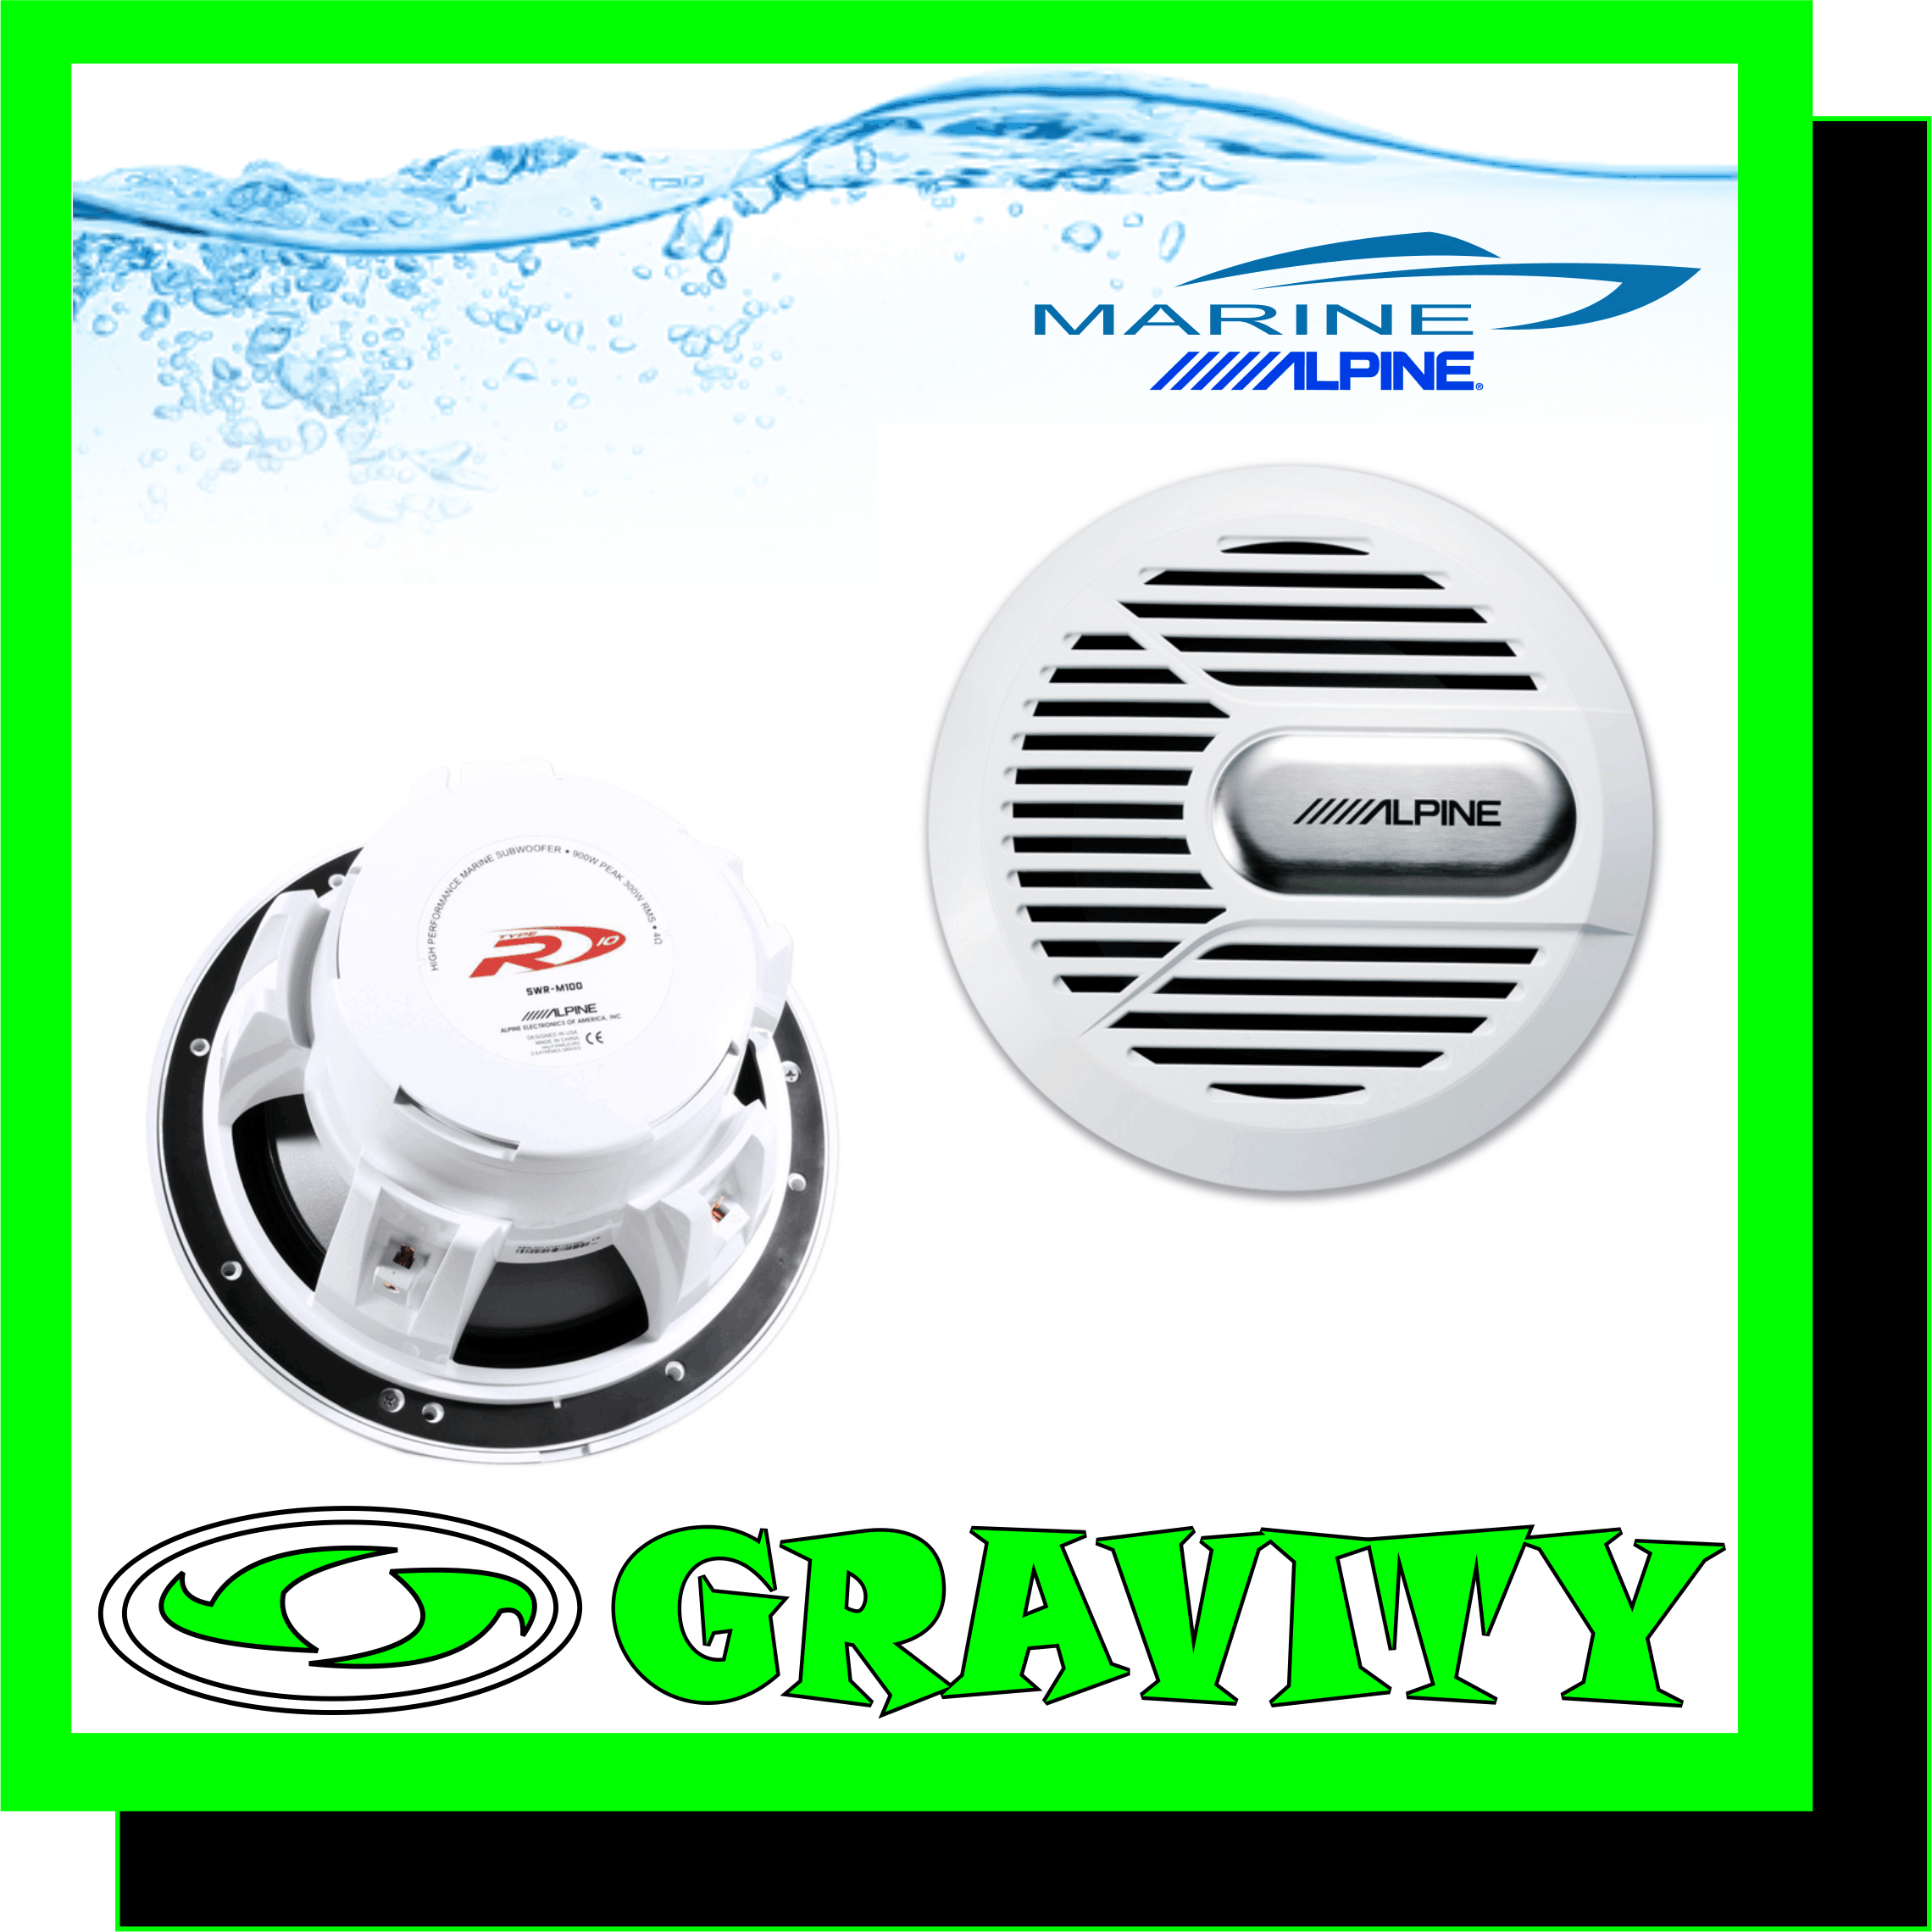 ALPINE SWR-M100 MARINE SUBWOOFER  DESCRIPTION General Features:  300W RMS/ 900W Peak 4 O Impedance High Excursion for deep, high output bass Infinite Baffle Design for widest application Custom high-strength polypropylene frame High AMplitude Multi-Roll (HAMR) Surround (Pat. Pend) CRC Motor Structure (Patented) Thermal Management System Integrated Insert & Spade Terminals Hidden Screw Mounting & Grille Design Waterproof Rubber Mounting Gasket Included  Gasket Design: Rubber Mounting Gasket  Tinsel Leads Design: 16ga. Stranded Leads, Insulated  Terminals Design: 2-Way, Insert & Quick-Connect Terminals Layout: One Side  Frame Design: Custom High Strength 5-Leg Material: Injection Molded Polypropylene  Motor Structure Configuration: Airflow Management System Pole Geometry: Compound Radius Curve  Voice Coil Design: 4-Layer Single Voice Coil Material: High Temp. Copper Wire on TIL Former  Spider Design: Progressive Material: Nomex�  Surround Design: High Amplitude Multi-Roll Material: Injection Molded Sanoprene� Diaphram Design: 2-Piece Structural Parabolic Material: Molded Polypropylene  SPECIFICATIONS Dimensions Added Volume: 0.055 cu. ft. (Reverse Mount, Magnet Out) Displacement: 0.083ft cu. ft. (Front Mount) Mounting Diameter: 229 mm (9-1/32?) Mounting Depth: 144.72 mm (5-11/16?) Power Handling Peak Power Handling: 900 Watts RMS Power Handling: 300 Watts CEA-2006 Power Rating: 300 Watts